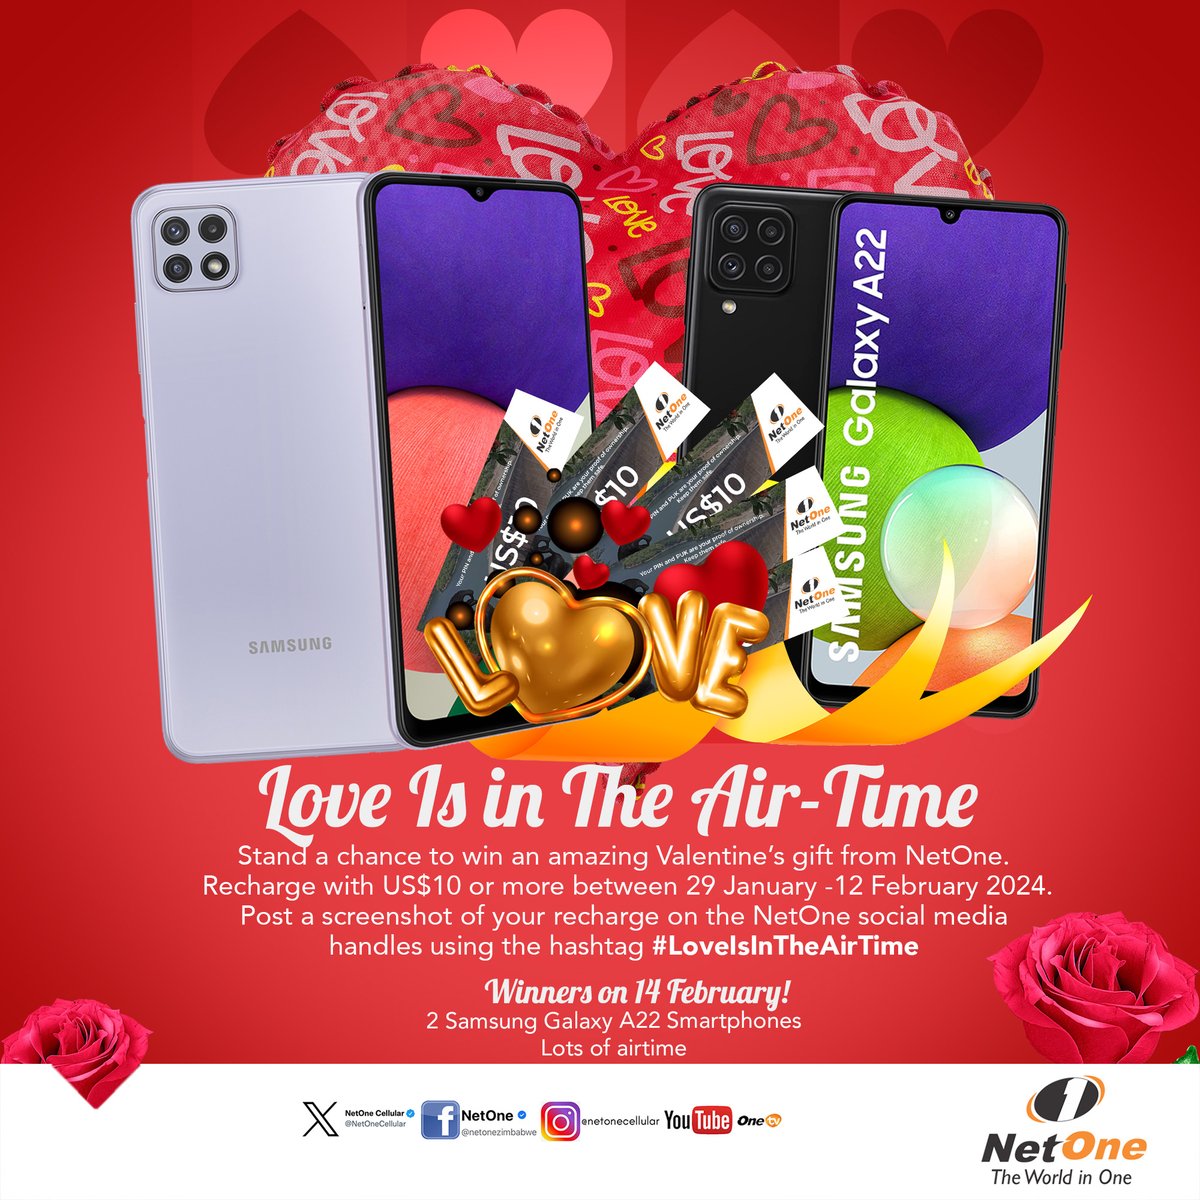 Love is calling, and it's in the airtime. Simply recharge with USD10 airtime, data, or more either via recharge voucher or OneMoney/ Bank, send the screenshot of the recharge and tag at least 5 people to win one of the two Samsung Galaxy A 22 Smartphones and lots of airtime.🎁✨